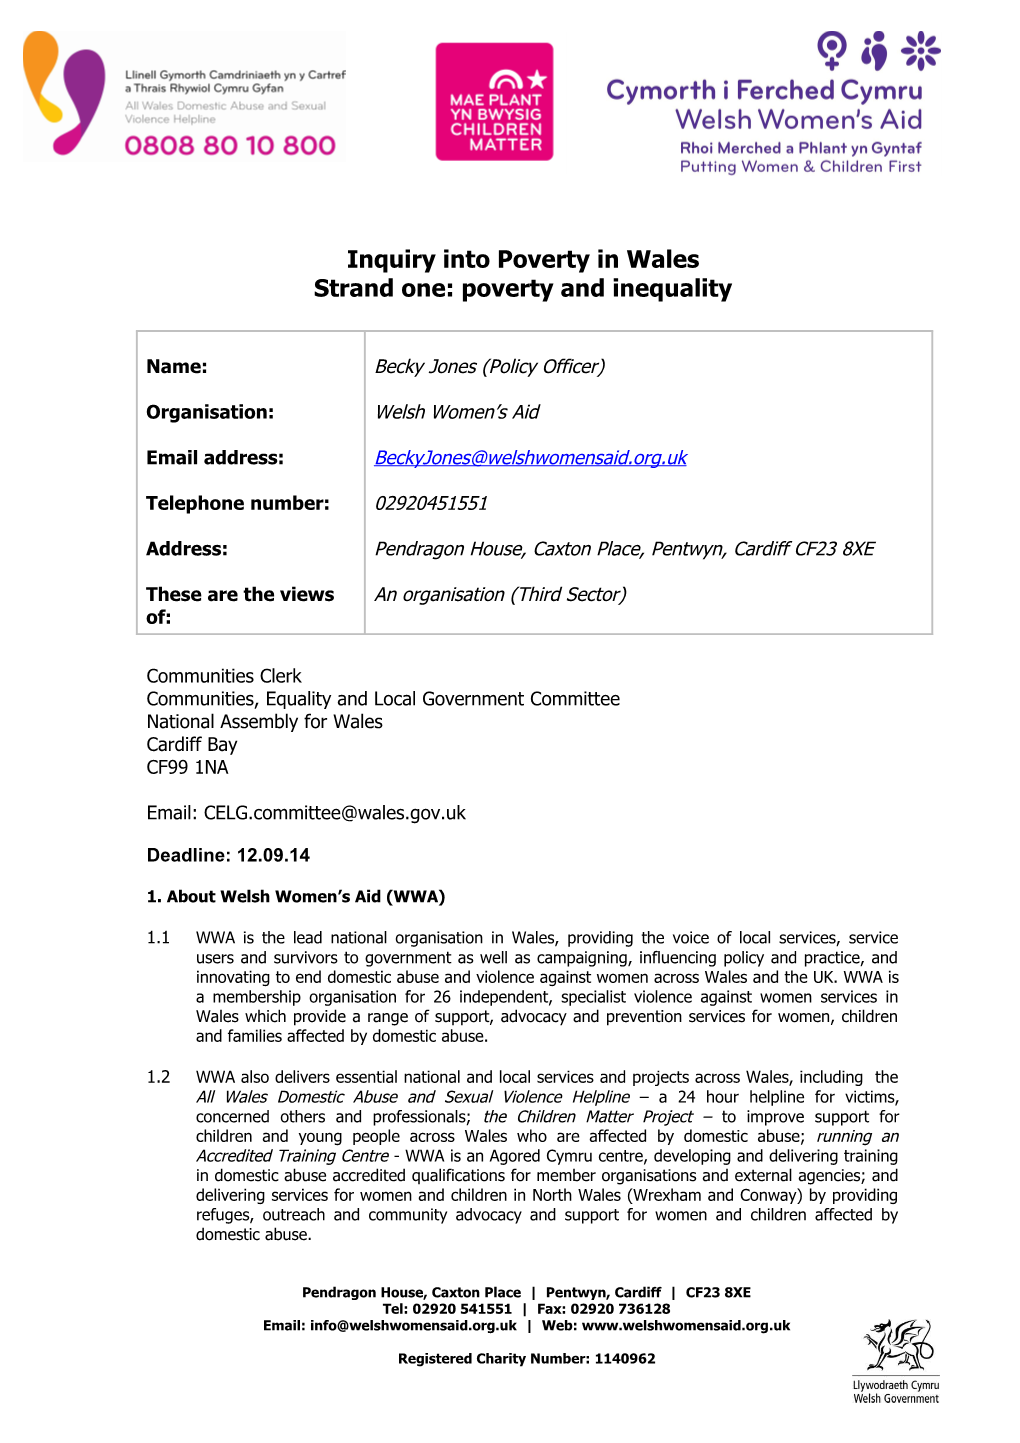 Inquiry Into Poverty in Wales